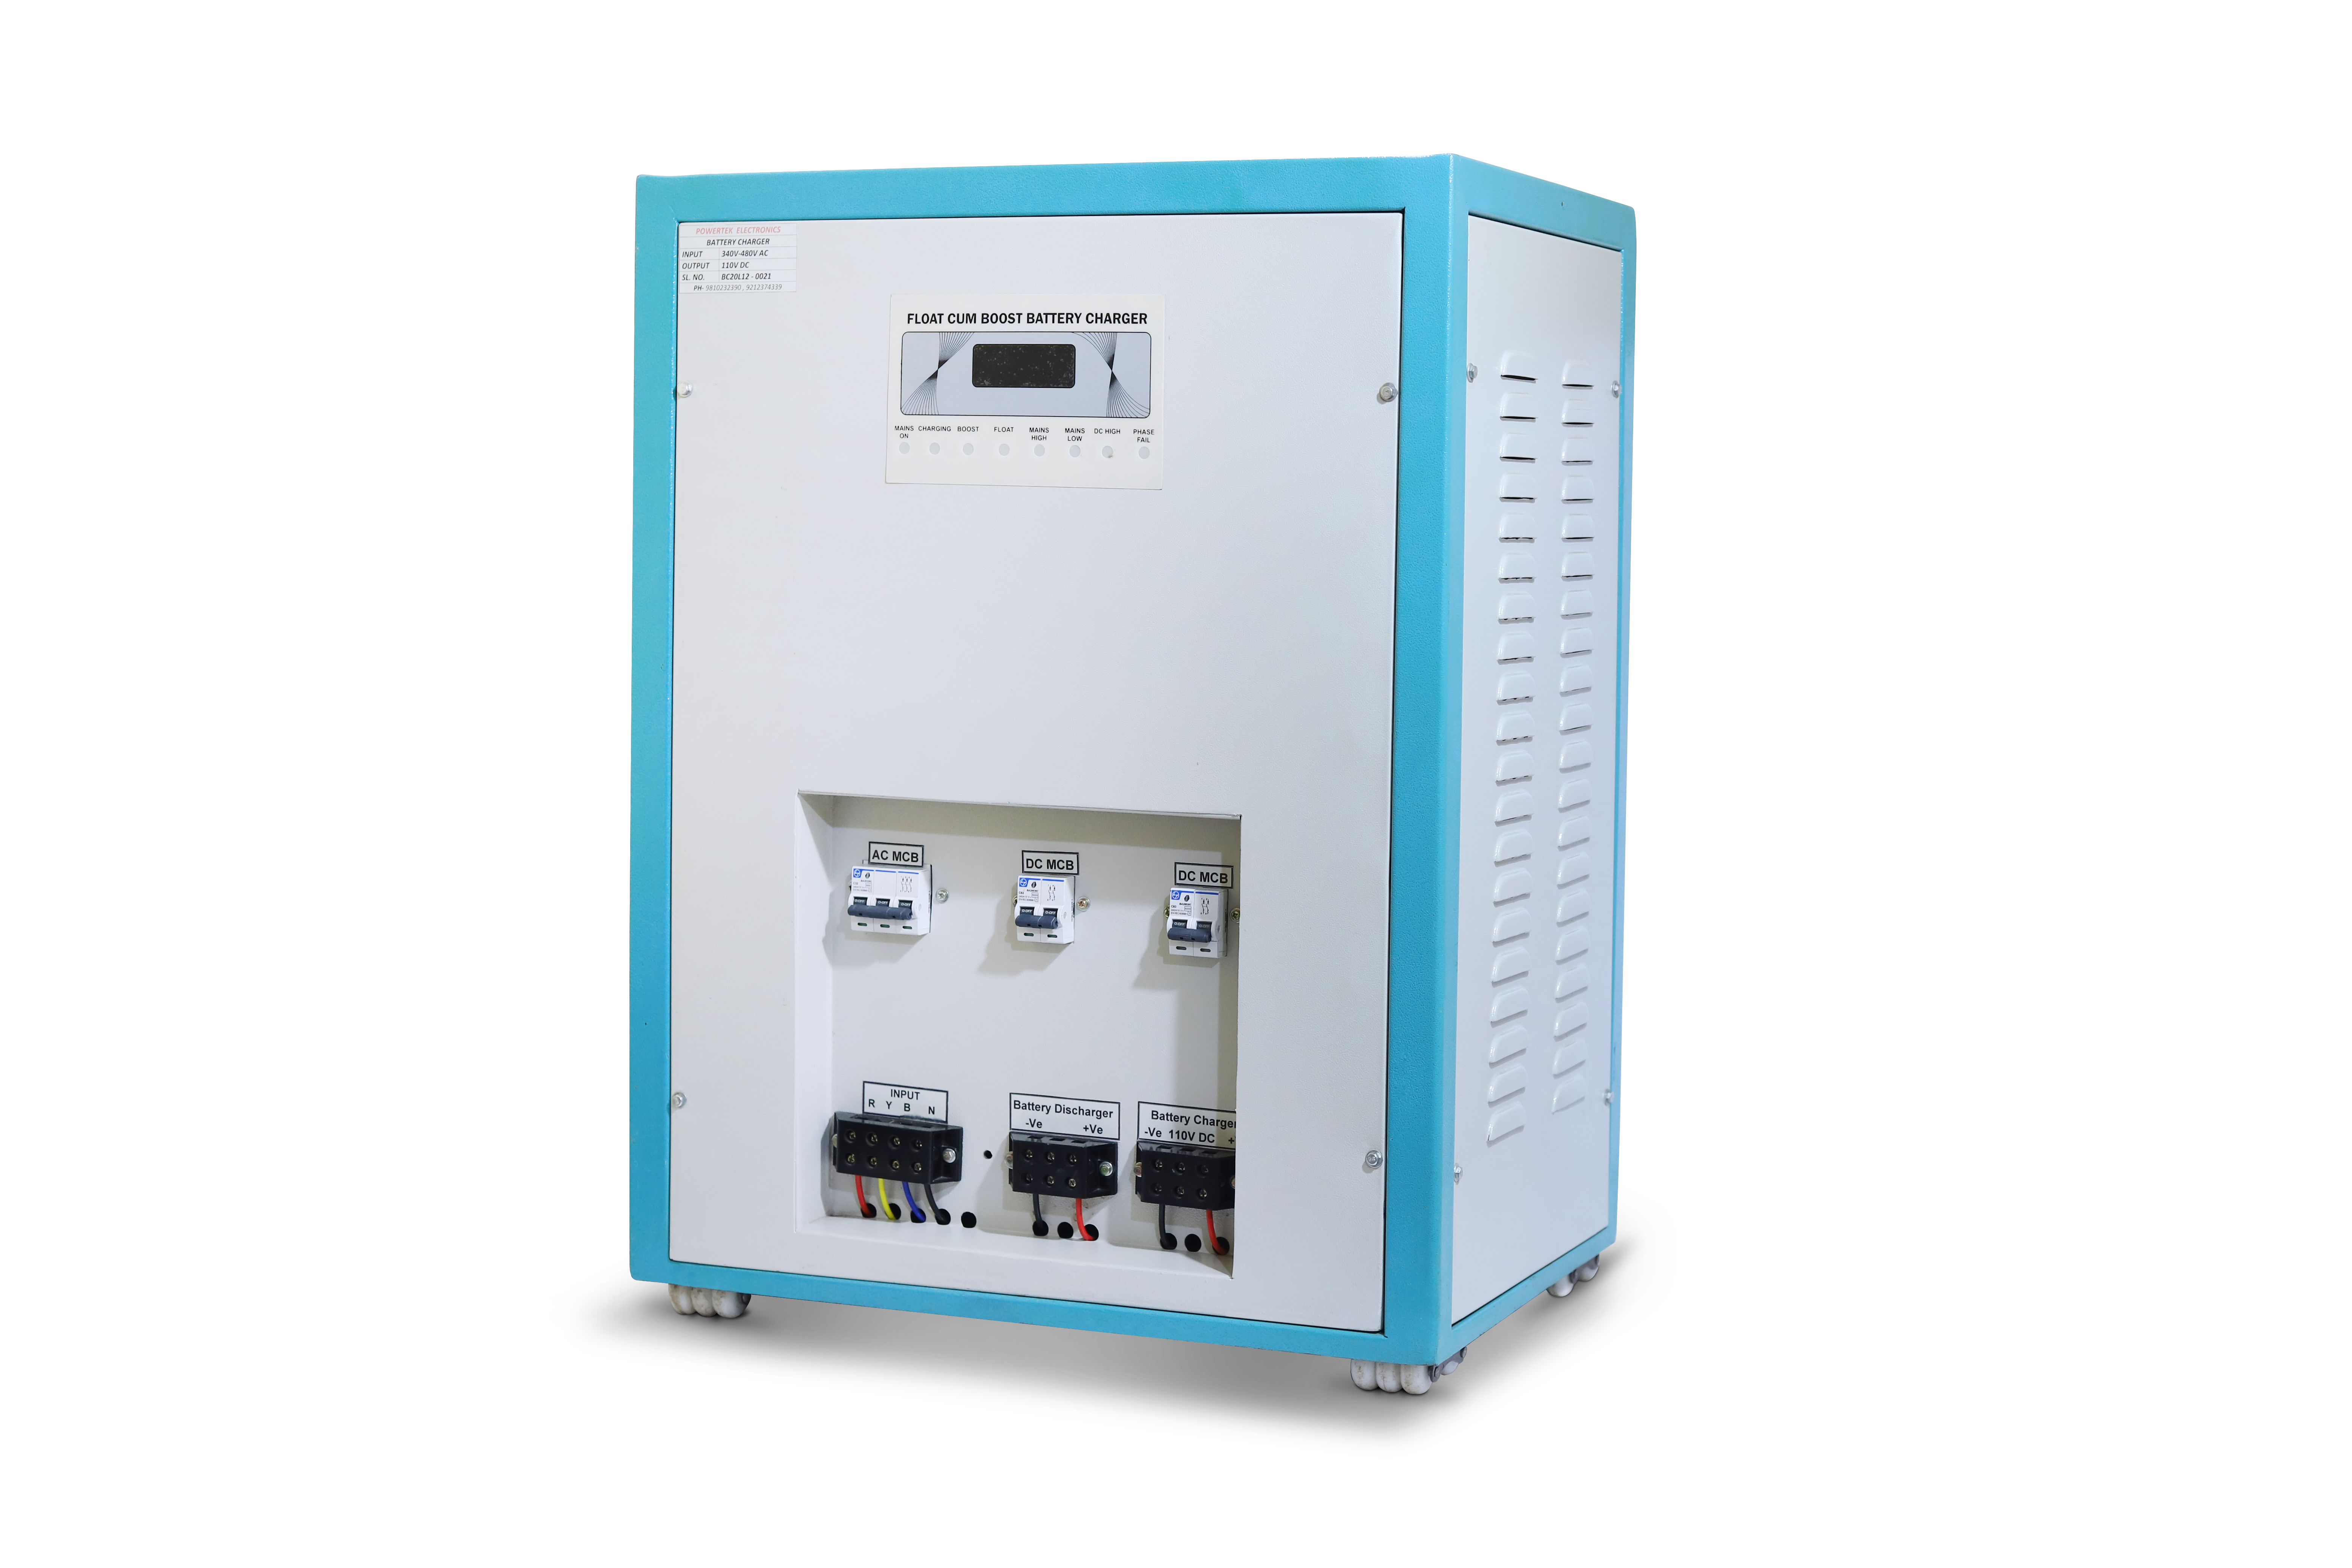 IGBT BASED BATTERY CHARGER / DISCHARGER